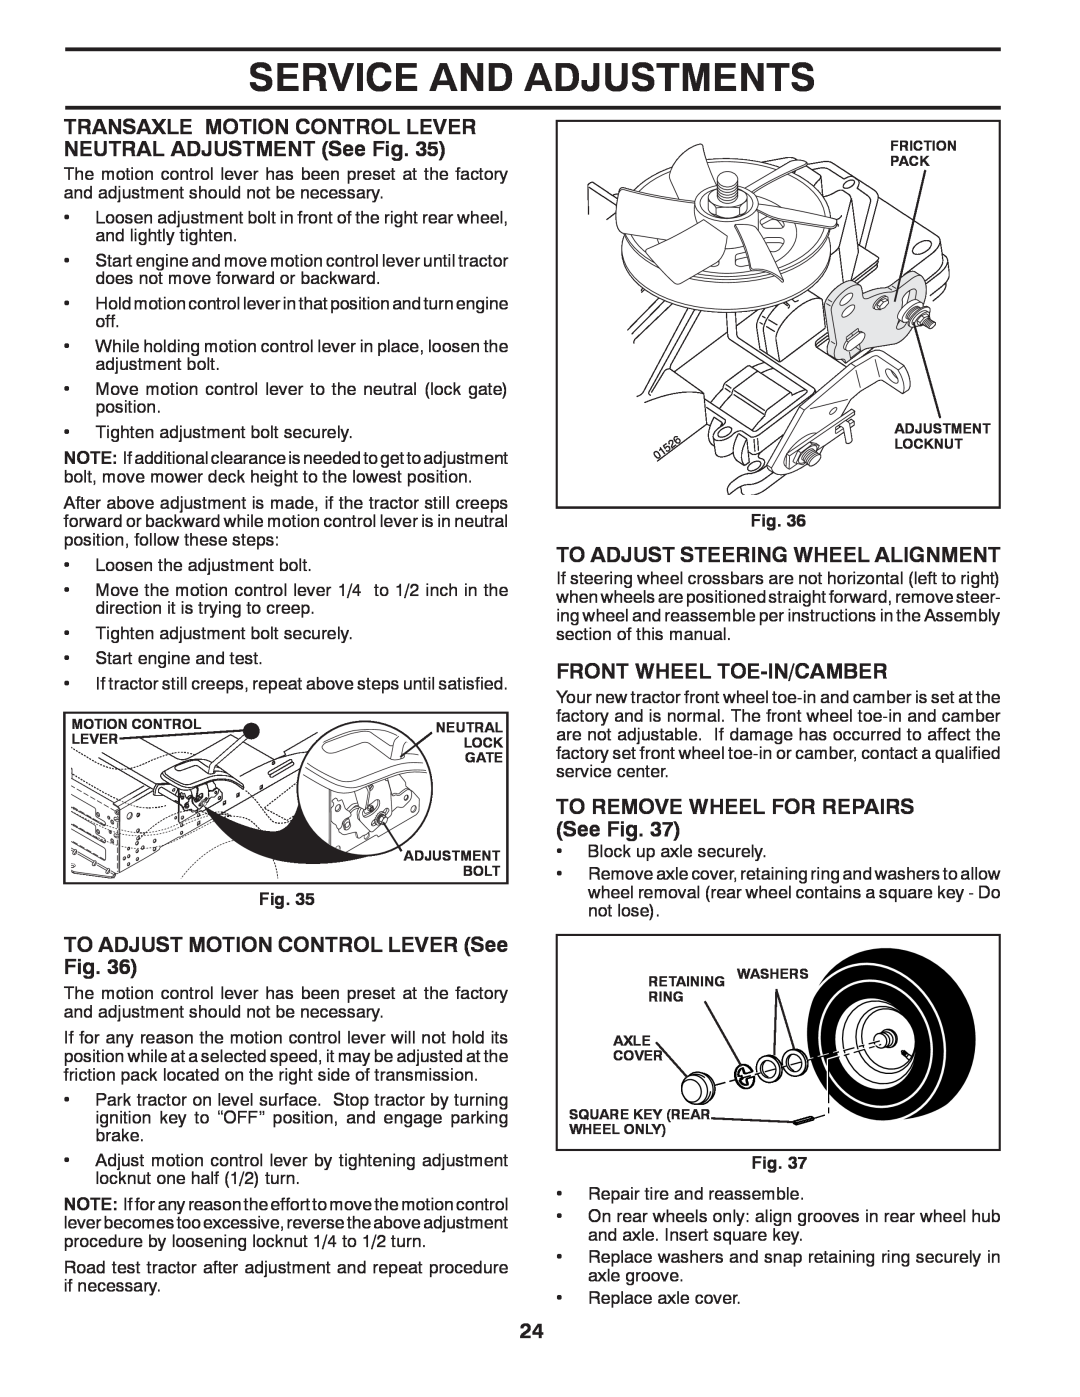 Husqvarna LTH1438 Service And Adjustments, TO ADJUST MOTION CONTROL LEVER See Fig, To Adjust Steering Wheel Alignment 